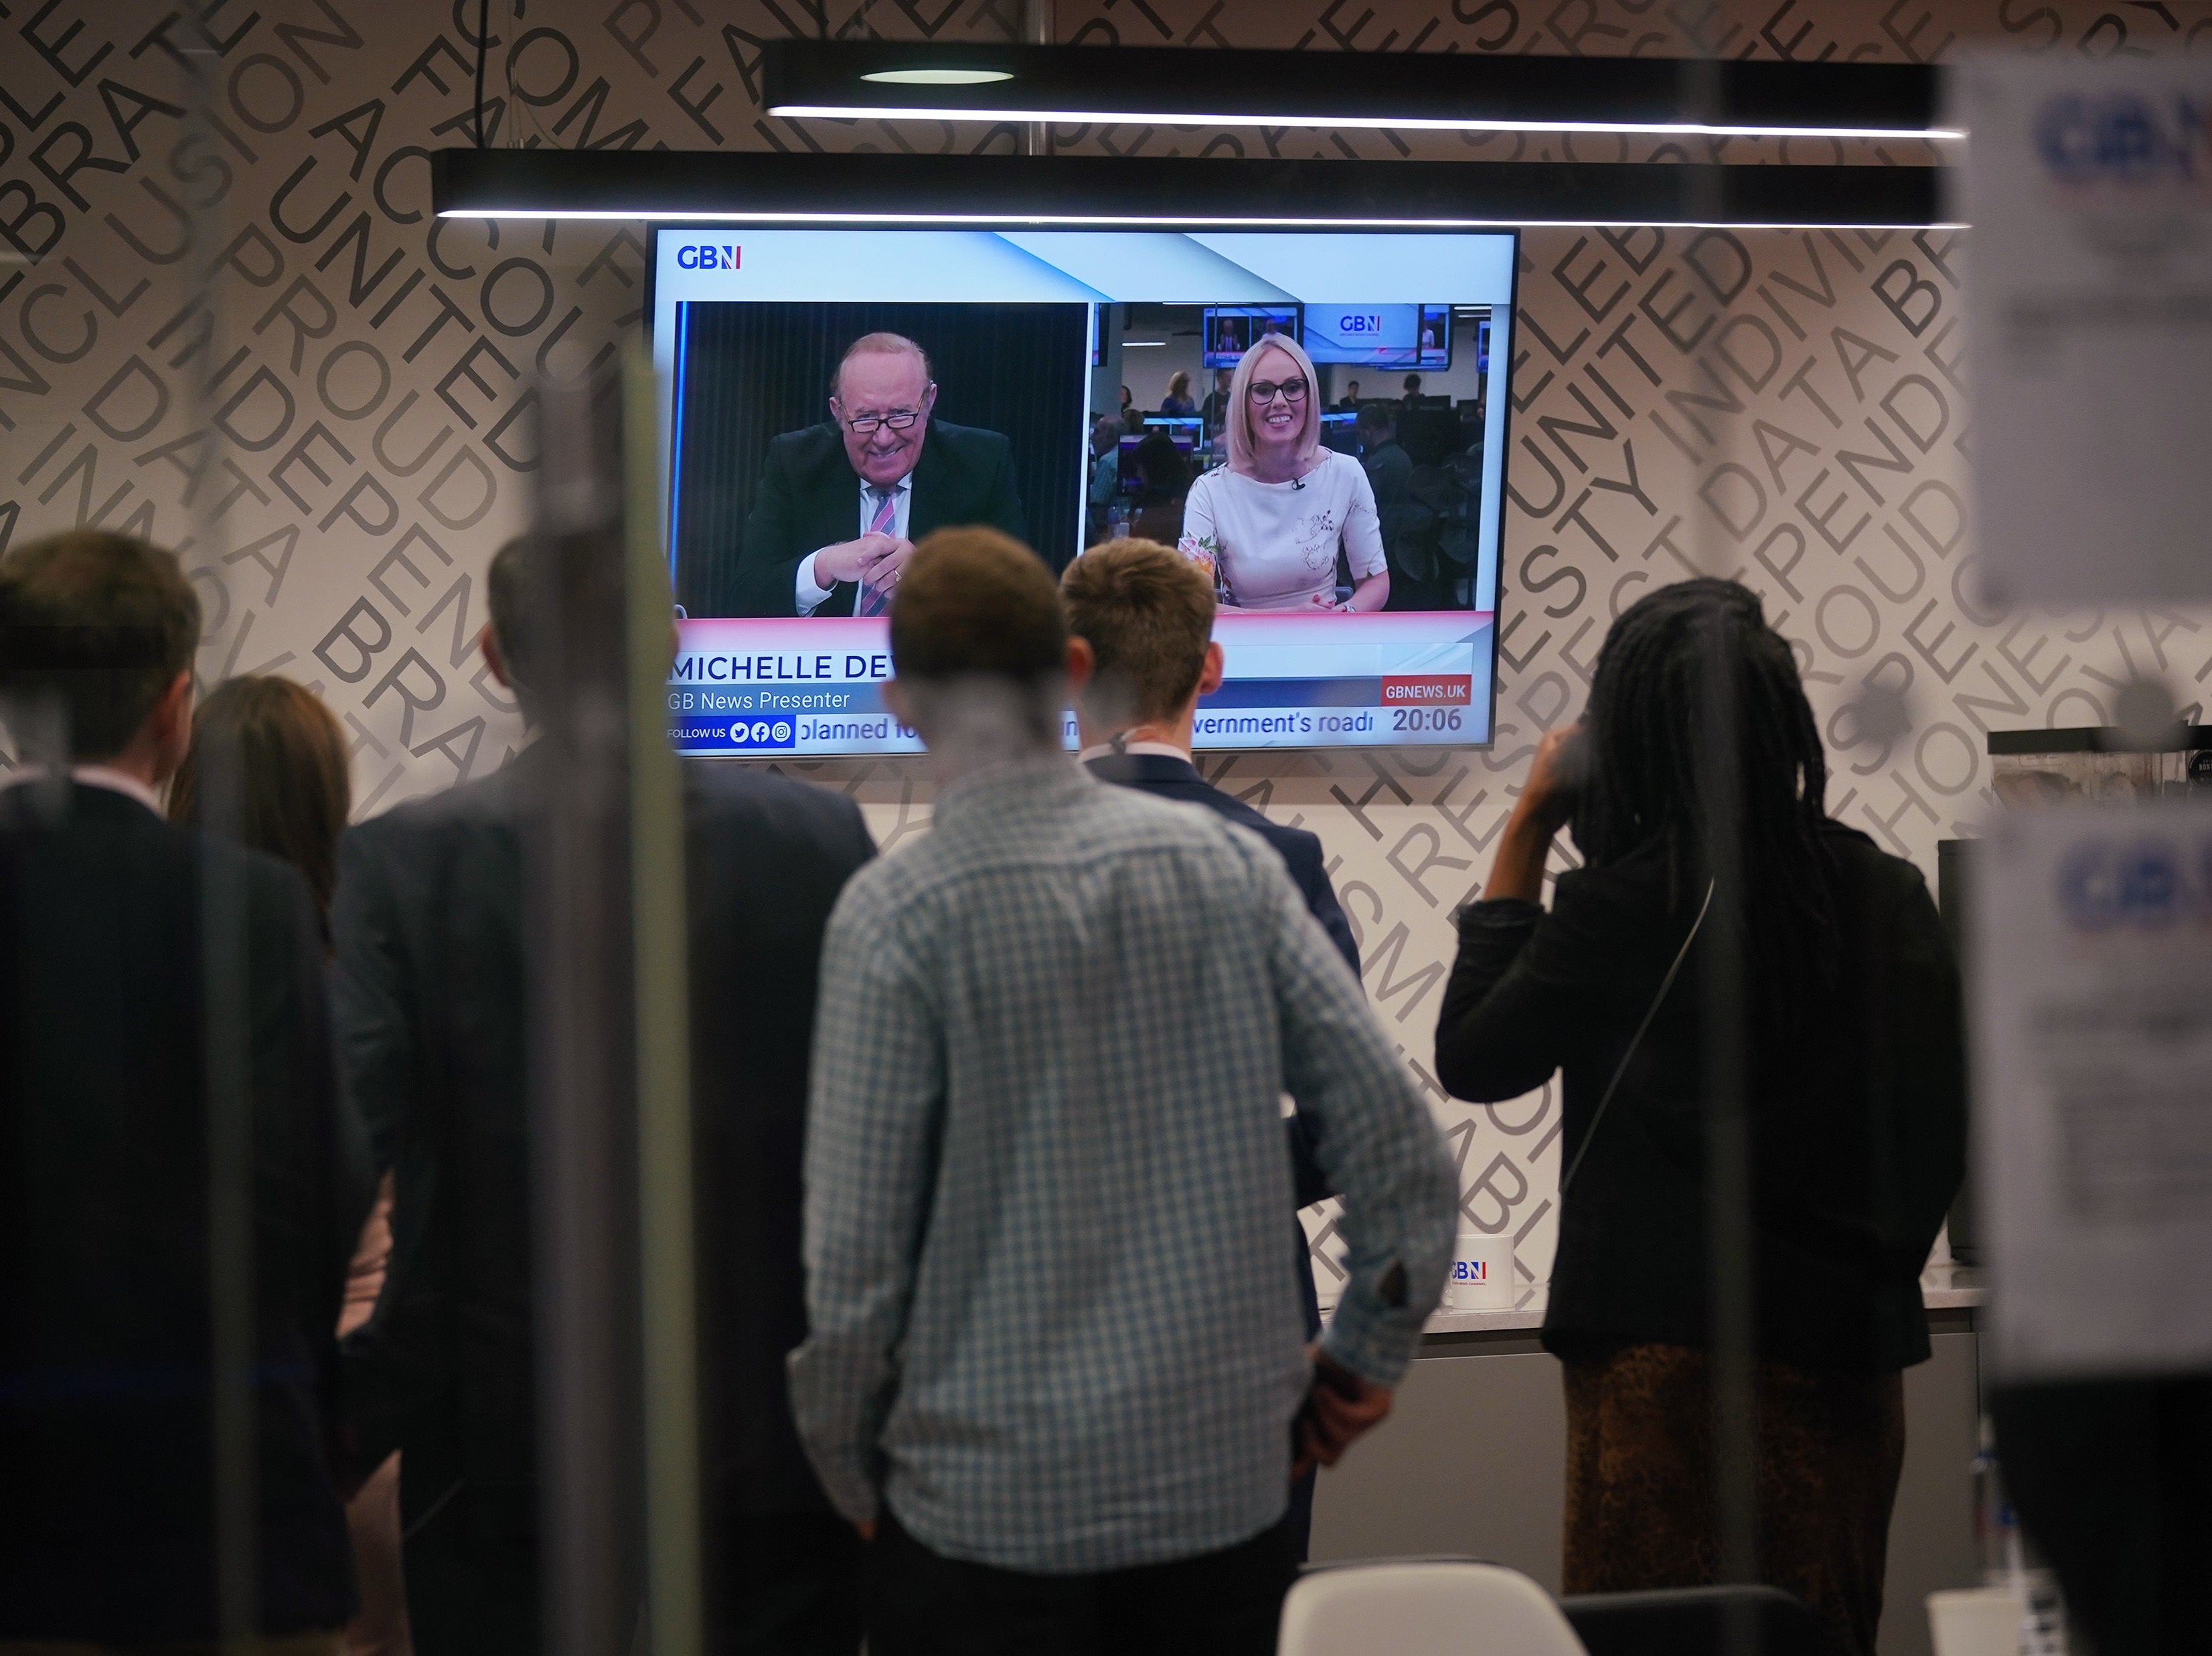 Staff in the green room watching a television screen showing presenters Andrew Neil and Michelle Dewberry broadcast from a studio, during the launch event for new TV channel GB News